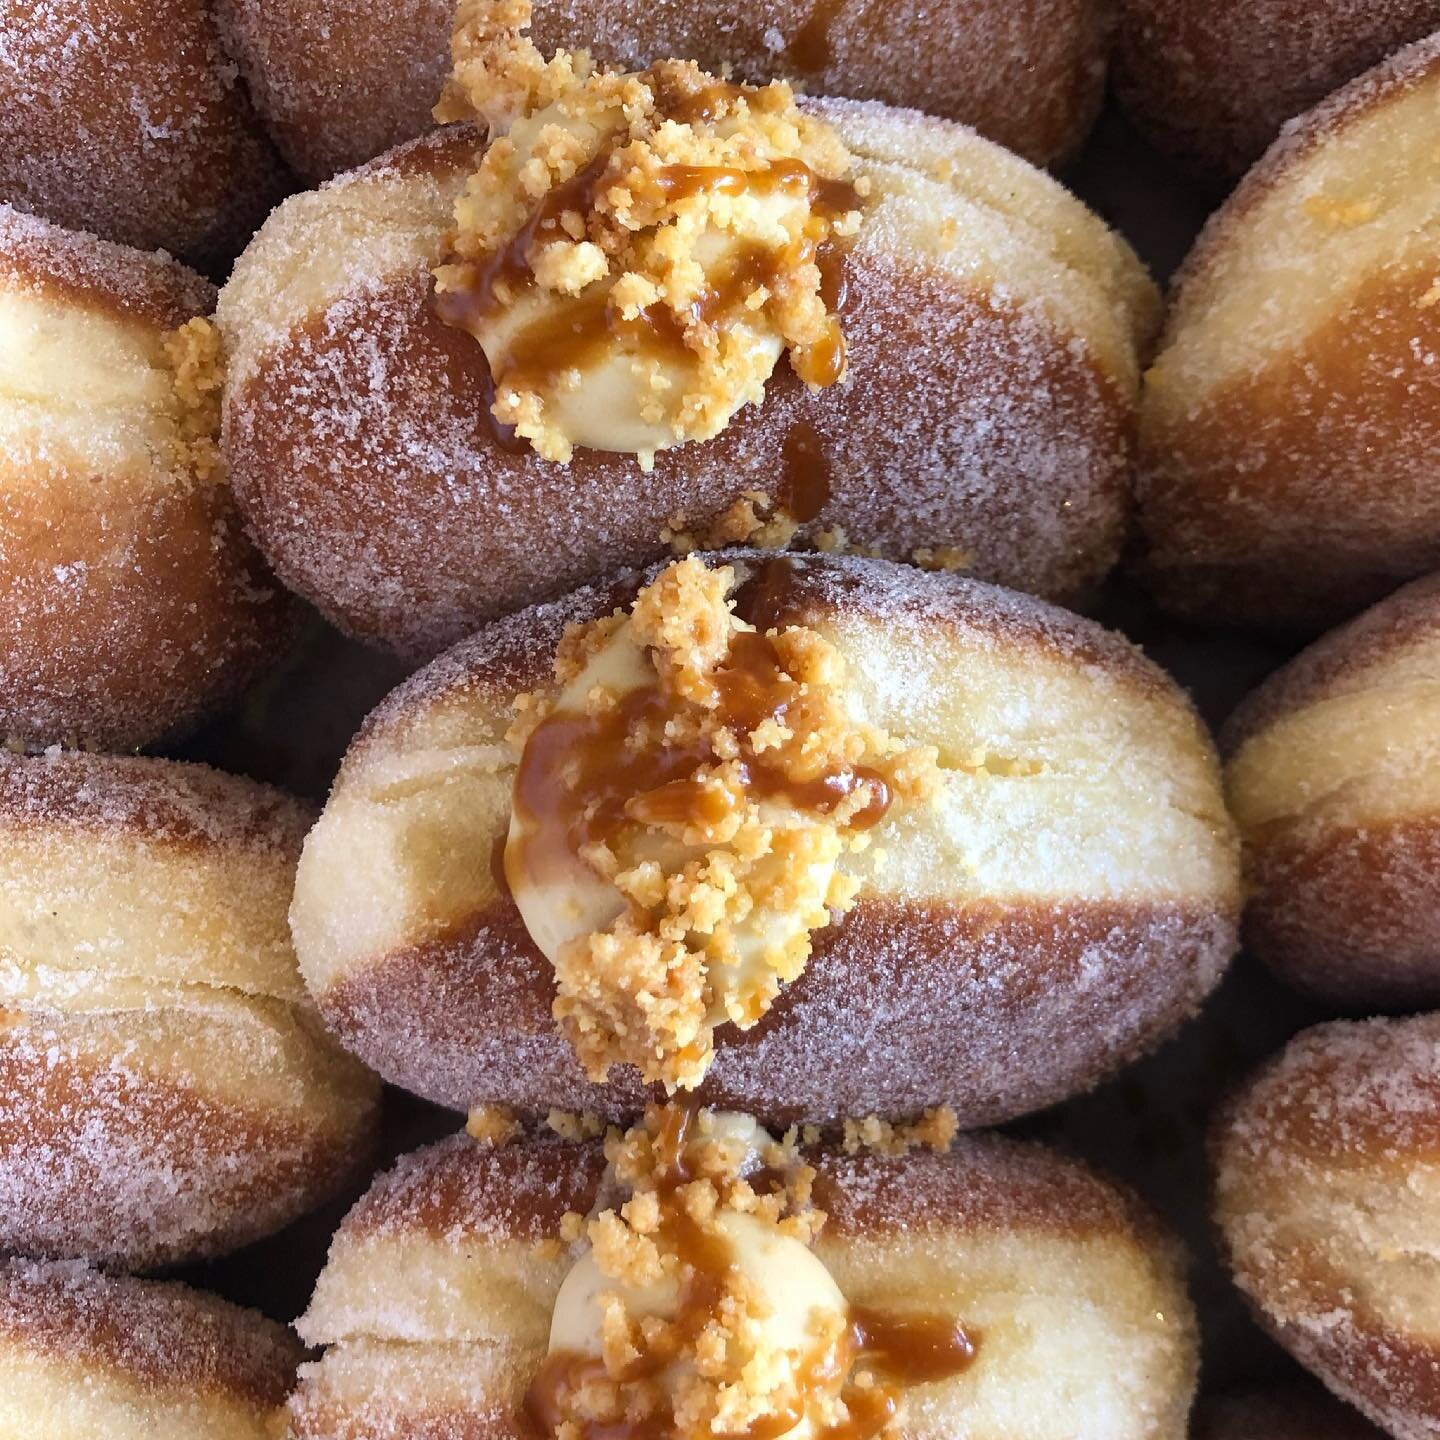 Banoffee doughnuts have been a massive hit this weekend &mdash; lucky for you we still have a few so pop by before they&rsquo;re gone!